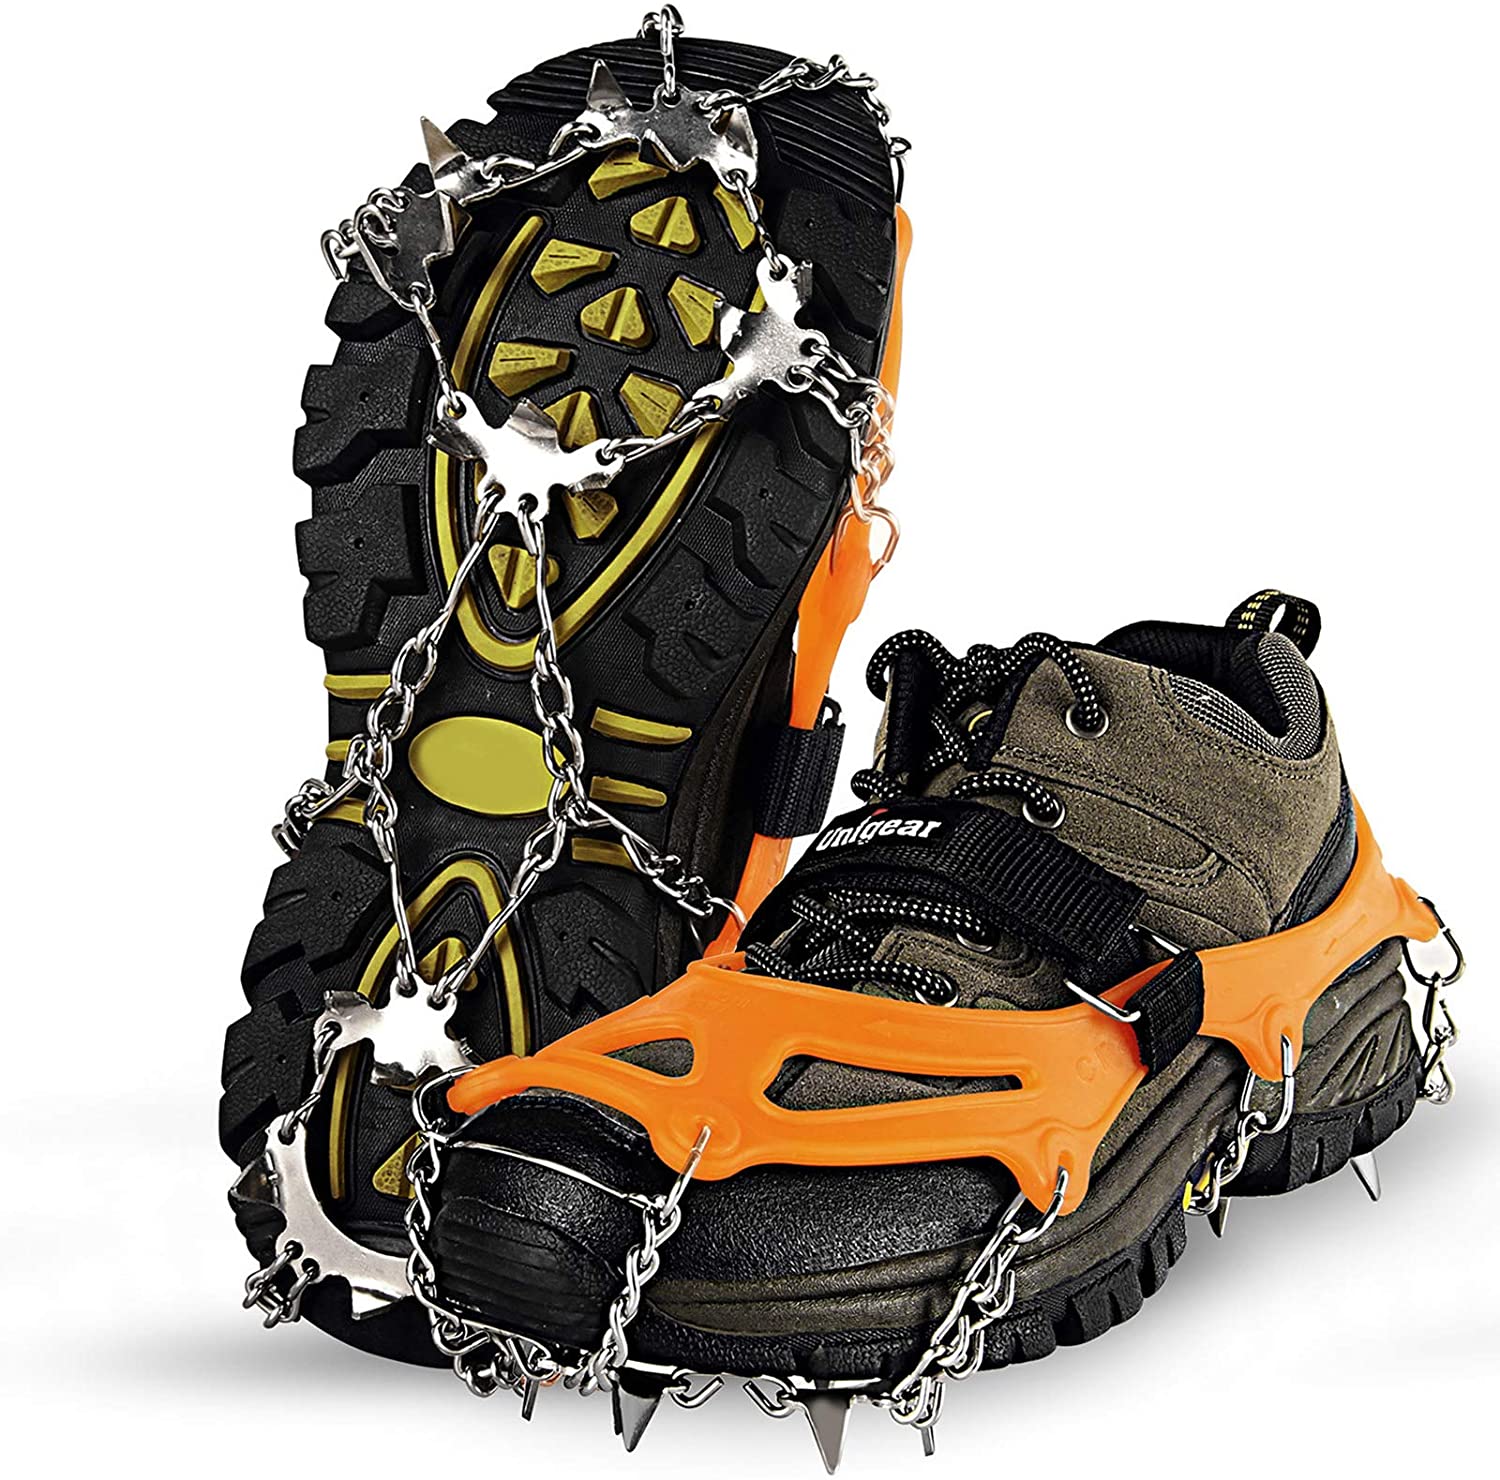 Milky House Traction Cleats Orange Anti Slip Ice Snow Grips Steel Spikes Crampons for Walking Climbing Hiking 